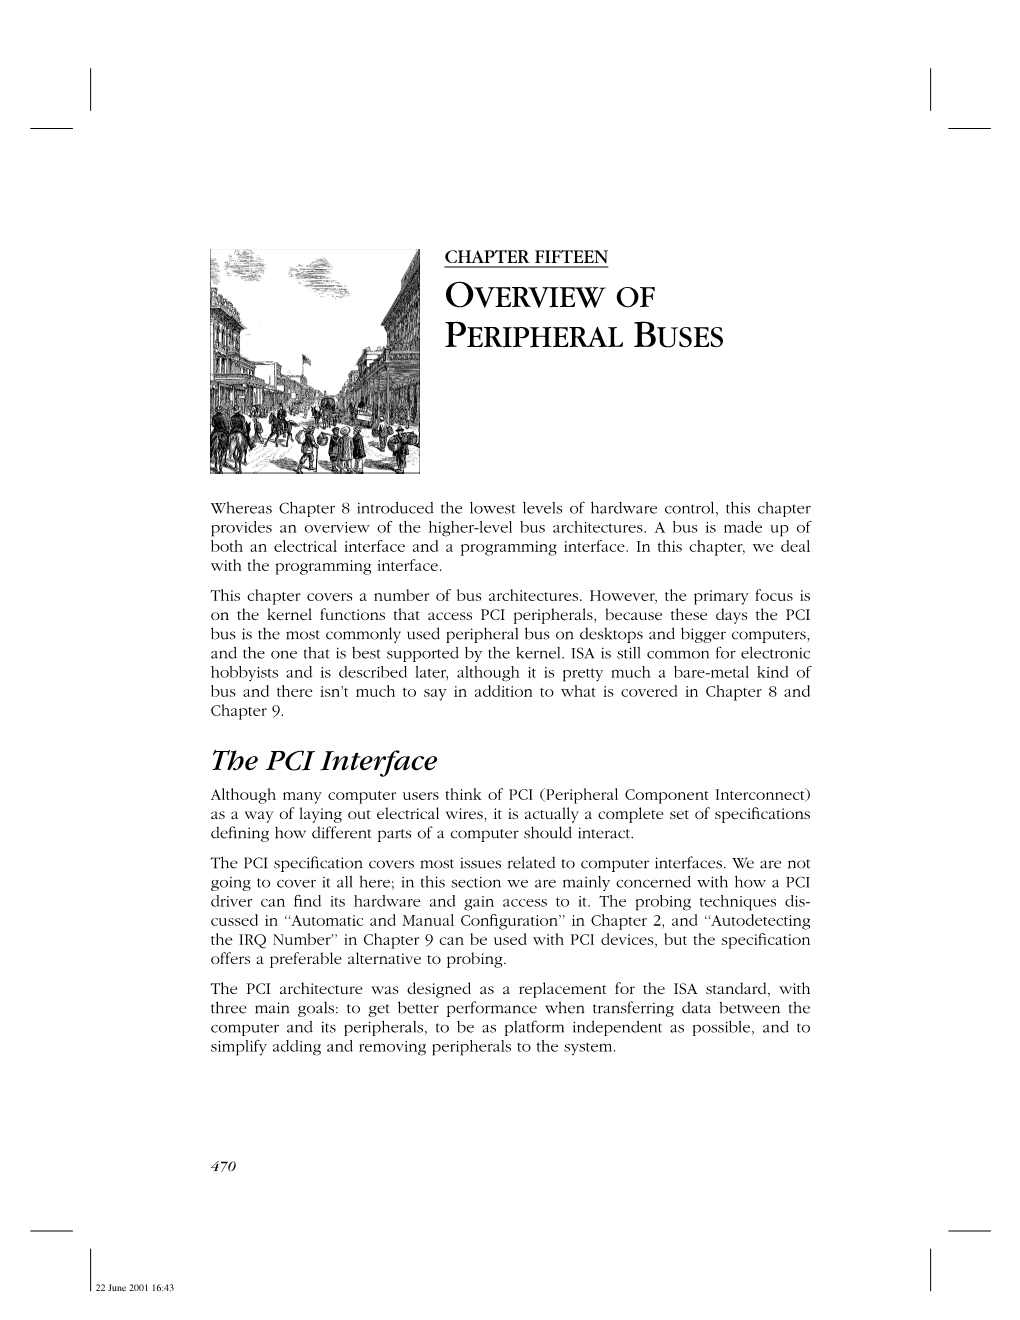 Chapter 15: Overview of Peripheral Buses